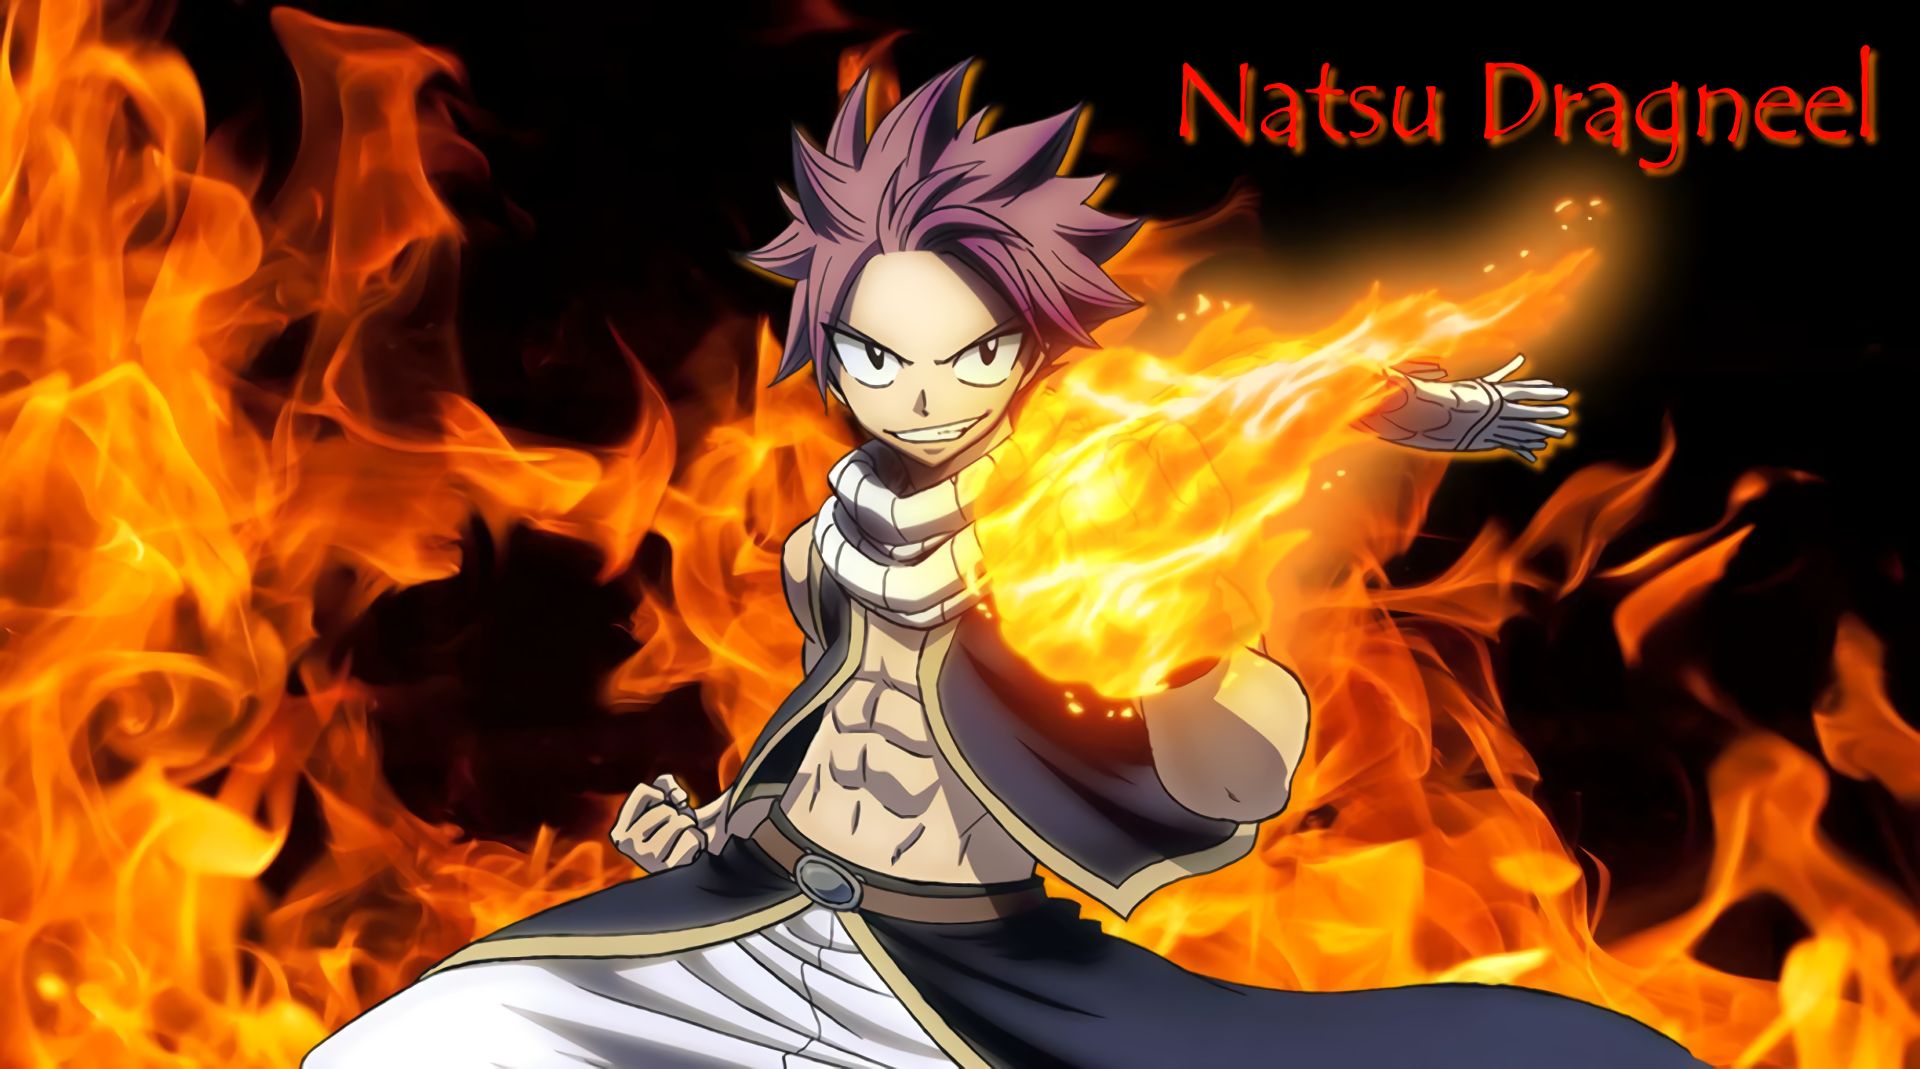 Mobile wallpaper Anime Fire Fairy Tail Natsu Dragneel 1262867 download  the picture for free